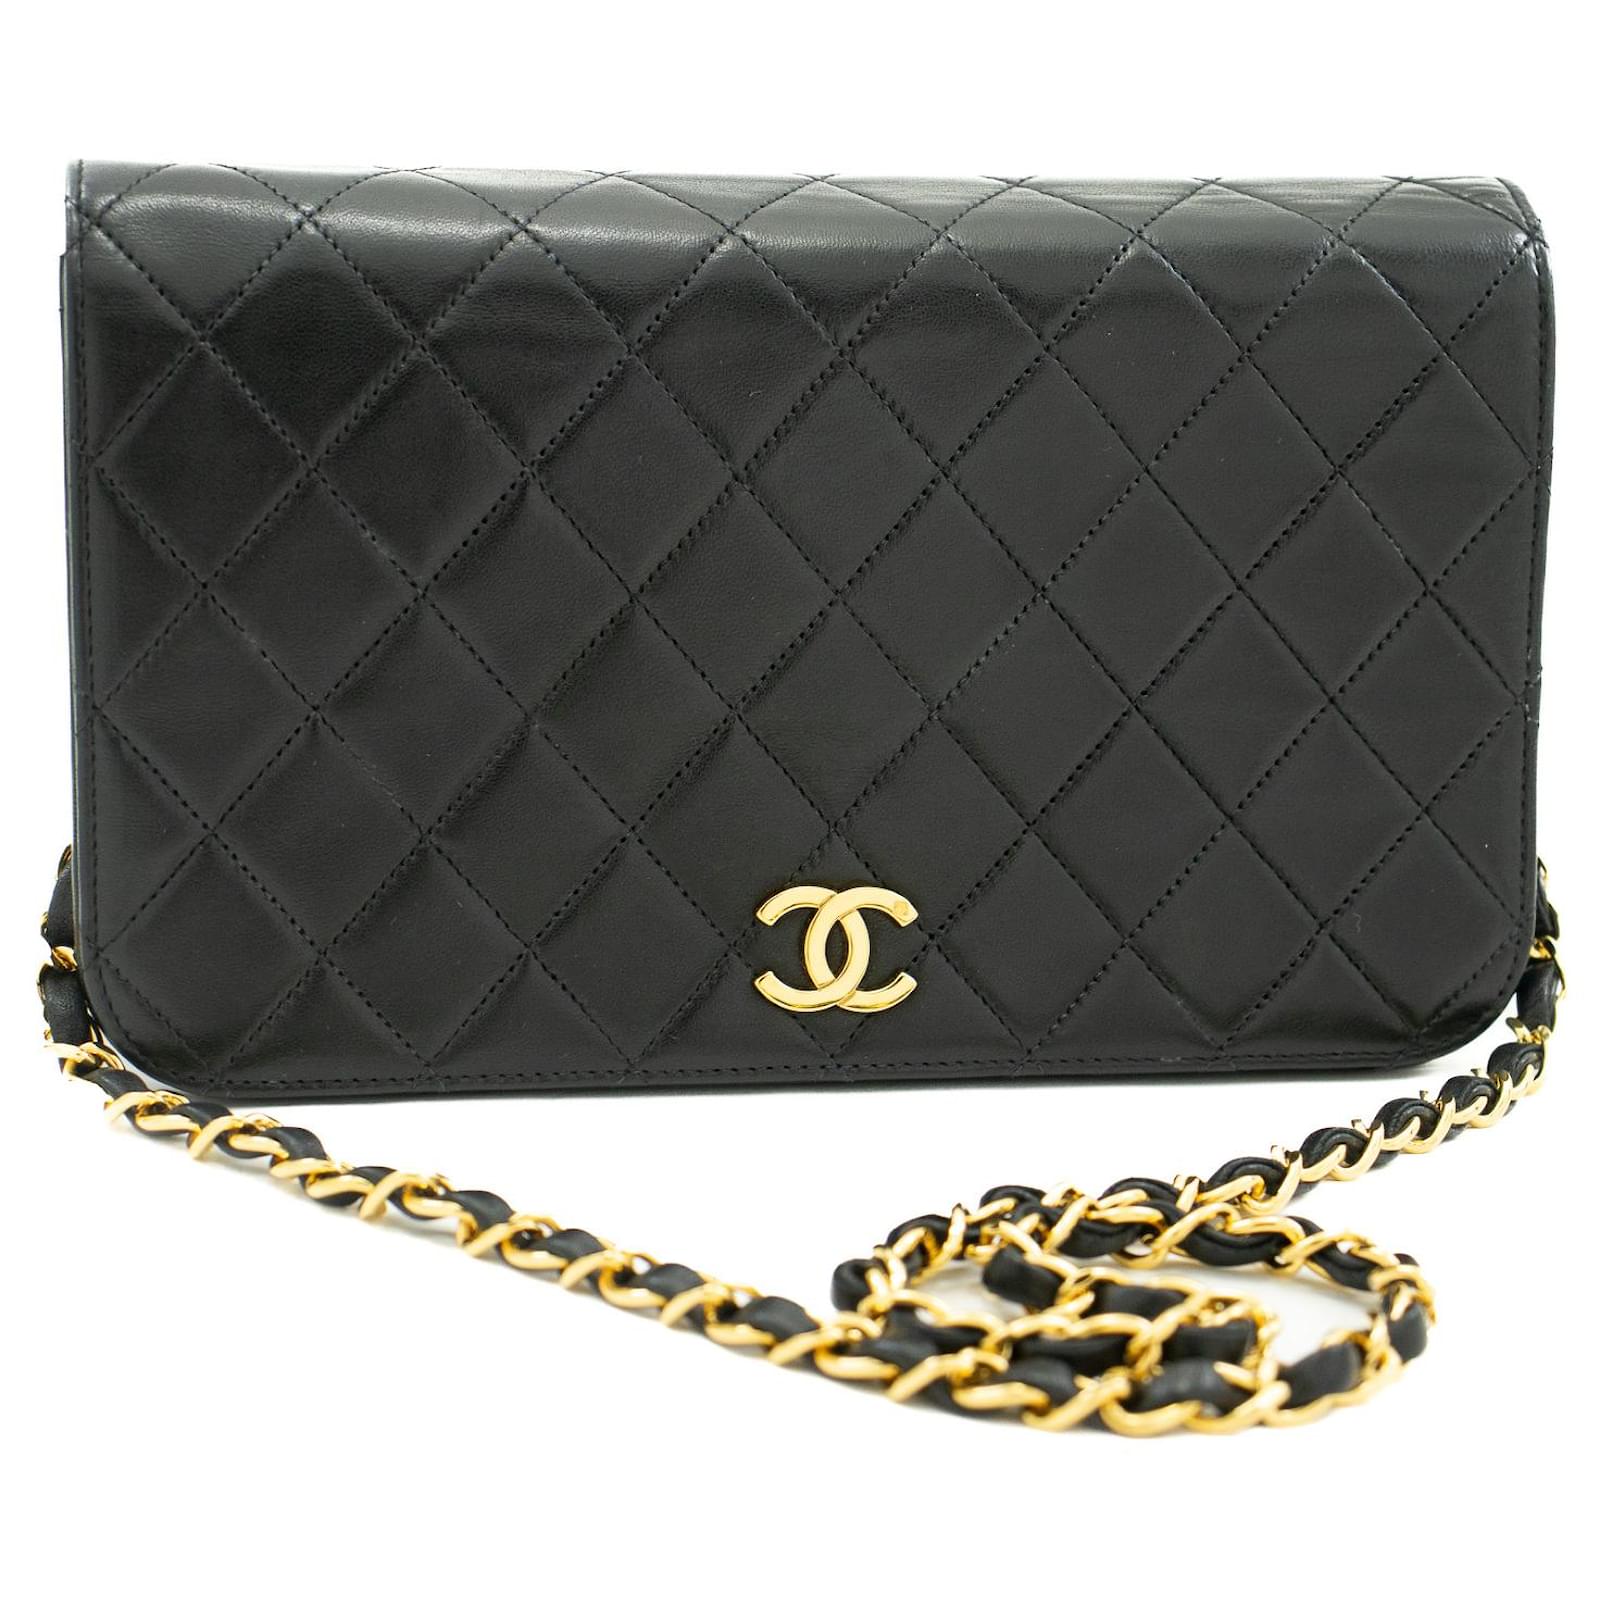 Chanel Wallet On Chain Timeless/classique Leather Handbag In Black